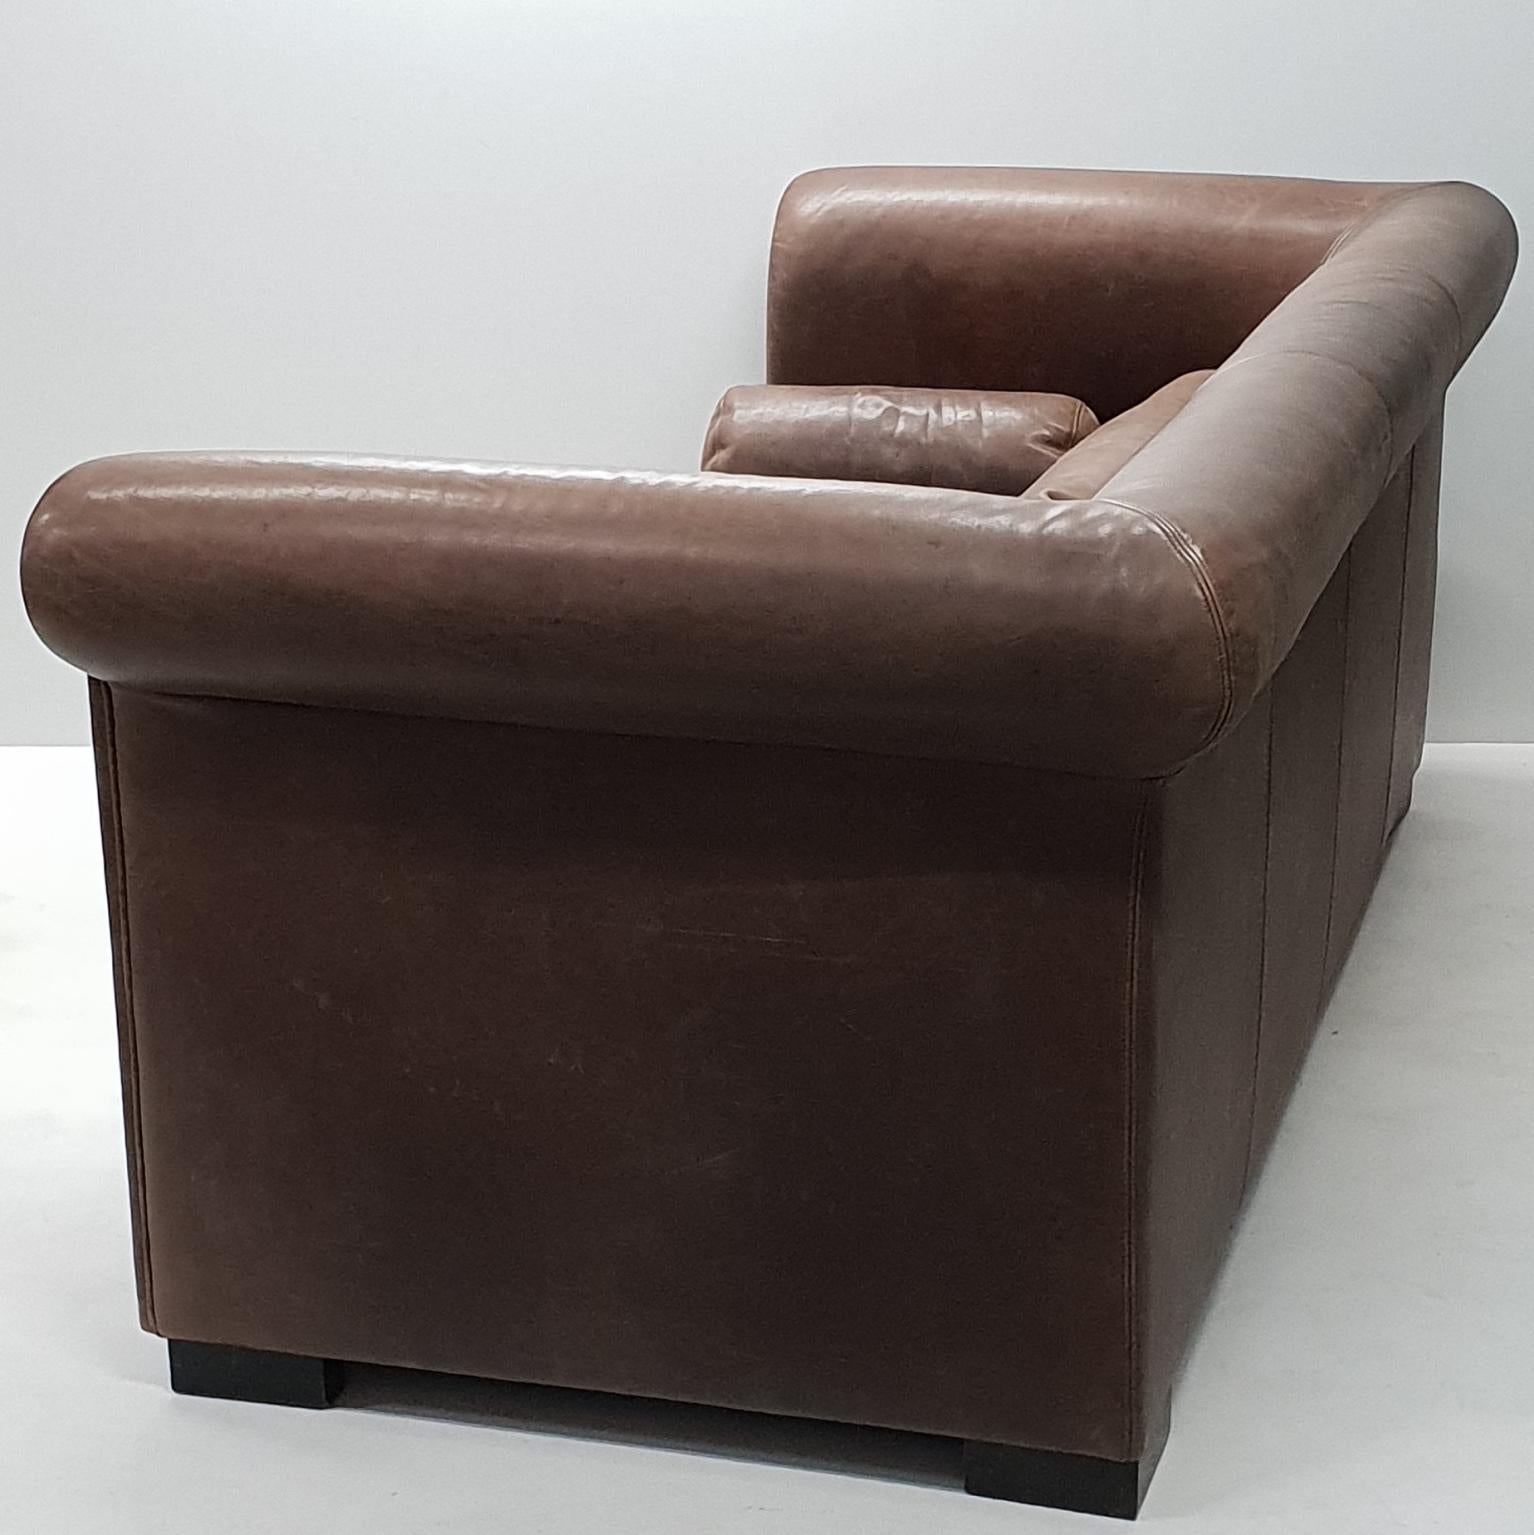 Industrial Brown Leather 3-Seat Sofa Model Alfred P. by Marco Milisich for Bax For Sale 6